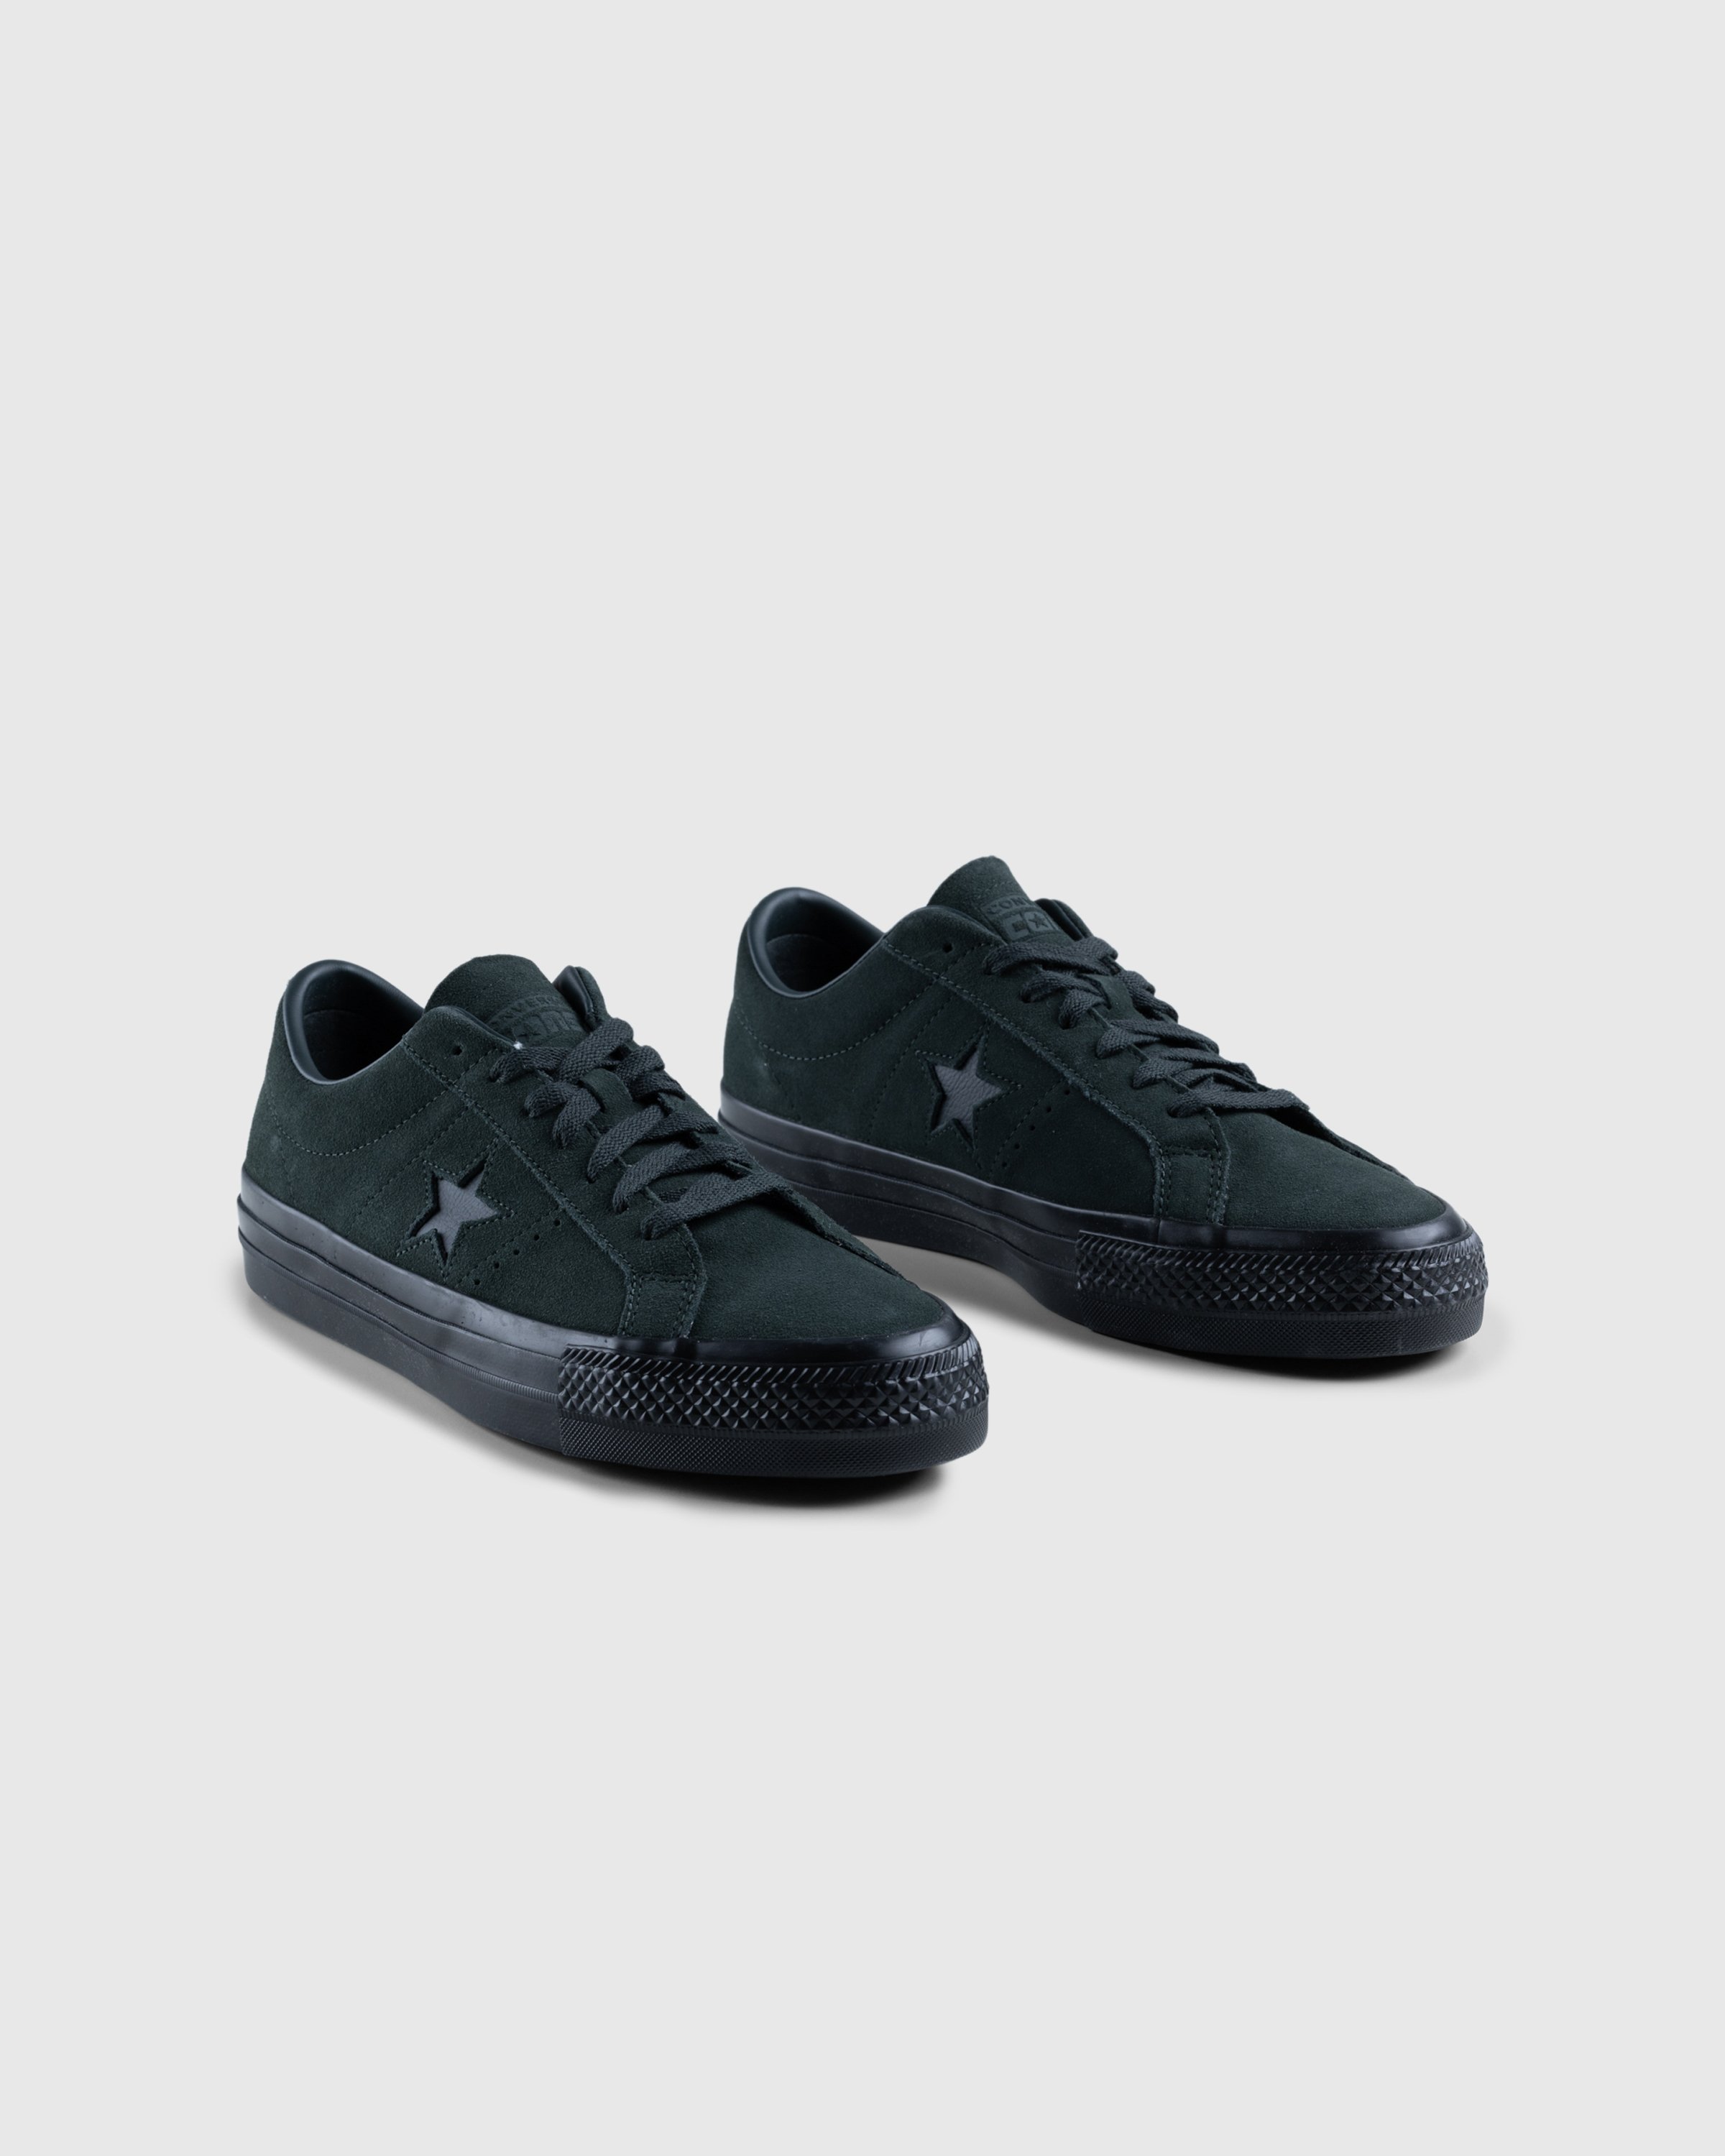 Converse - ONE STAR PRO OX SECRET PINES/BLACK/BLACK - Low Top Sneakers - undefined - Image 2